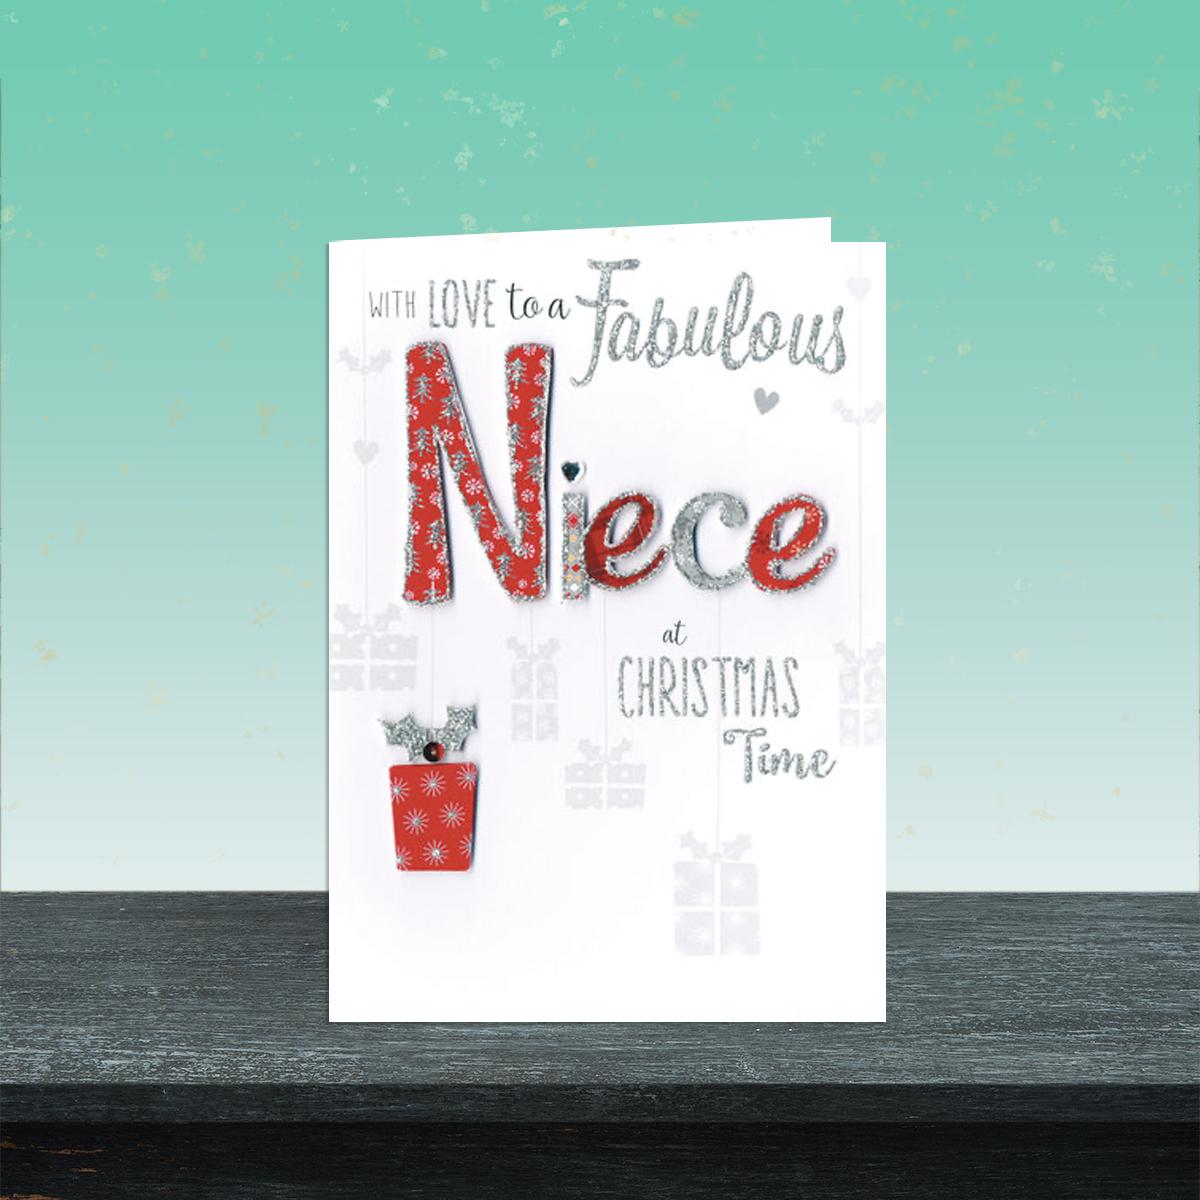 Niece Christmas Card Alongside Its Red Envelope